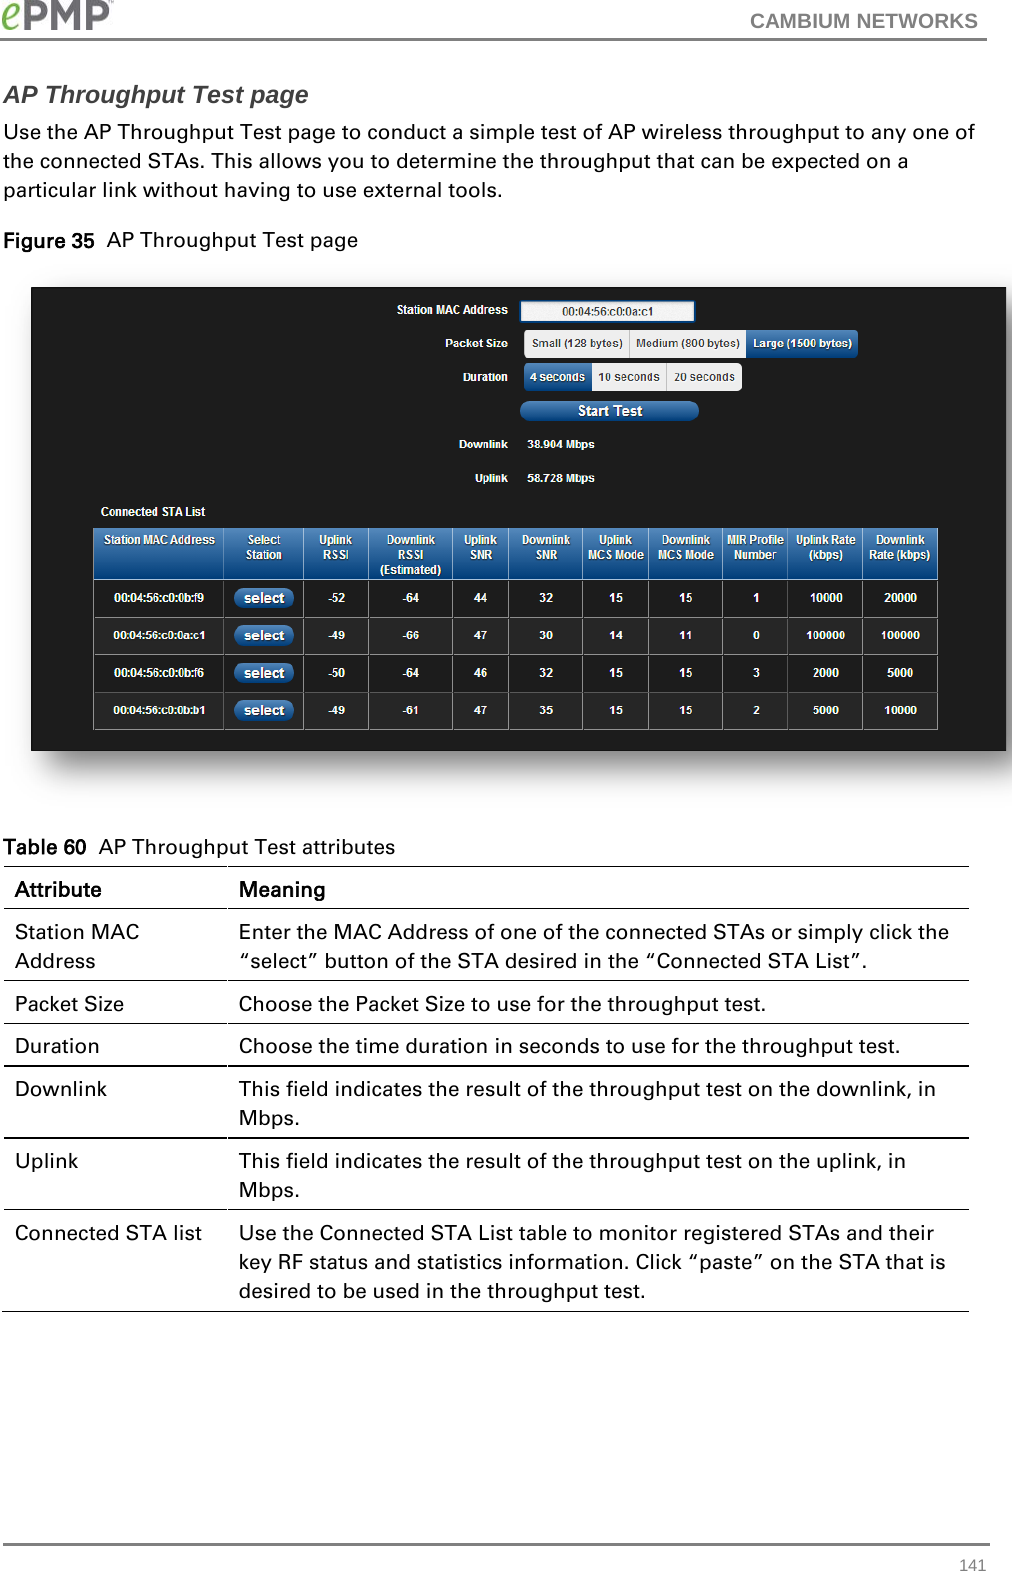 CAMBIUM NETWORKS  AP Throughput Test page Use the AP Throughput Test page to conduct a simple test of AP wireless throughput to any one of the connected STAs. This allows you to determine the throughput that can be expected on a particular link without having to use external tools.  Figure 35  AP Throughput Test page  Table 60  AP Throughput Test attributes Attribute Meaning Station MAC Address Enter the MAC Address of one of the connected STAs or simply click the “select” button of the STA desired in the “Connected STA List”. Packet Size Choose the Packet Size to use for the throughput test. Duration Choose the time duration in seconds to use for the throughput test. Downlink This field indicates the result of the throughput test on the downlink, in Mbps. Uplink This field indicates the result of the throughput test on the uplink, in Mbps. Connected STA list Use the Connected STA List table to monitor registered STAs and their key RF status and statistics information. Click “paste” on the STA that is desired to be used in the throughput test.  141 